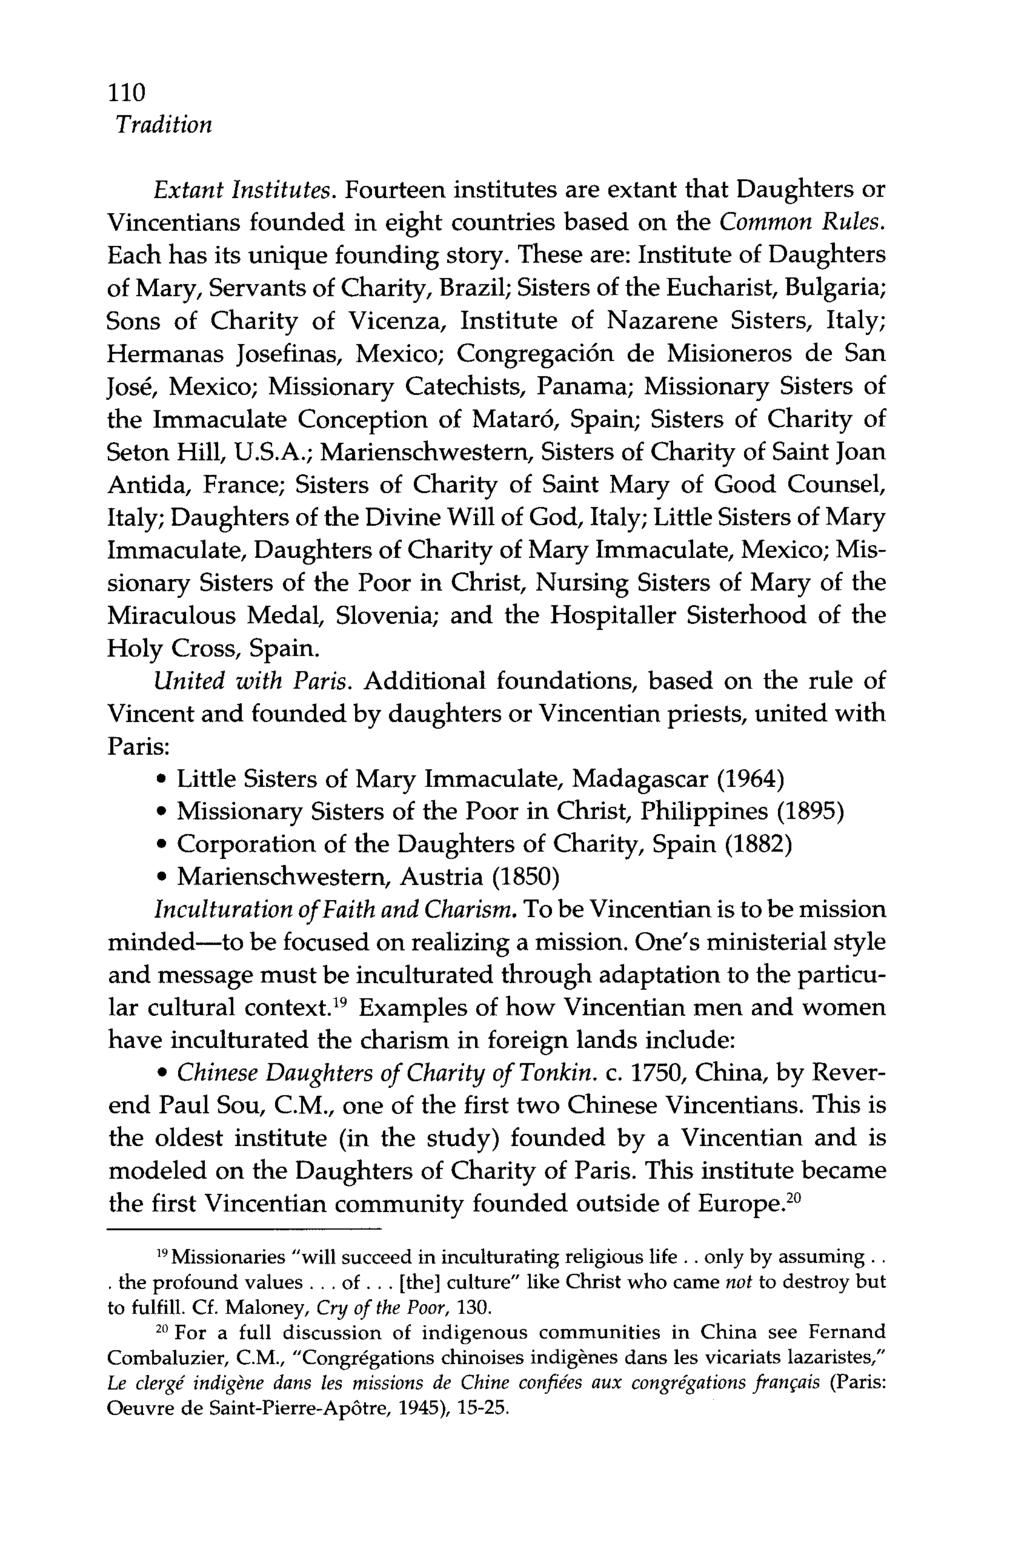 110 Tradition Extant Institutes. Fourteen institutes are extant that Daughters or Vincentians founded in eight countries based on the Common Rules. Each has its unique founding story.